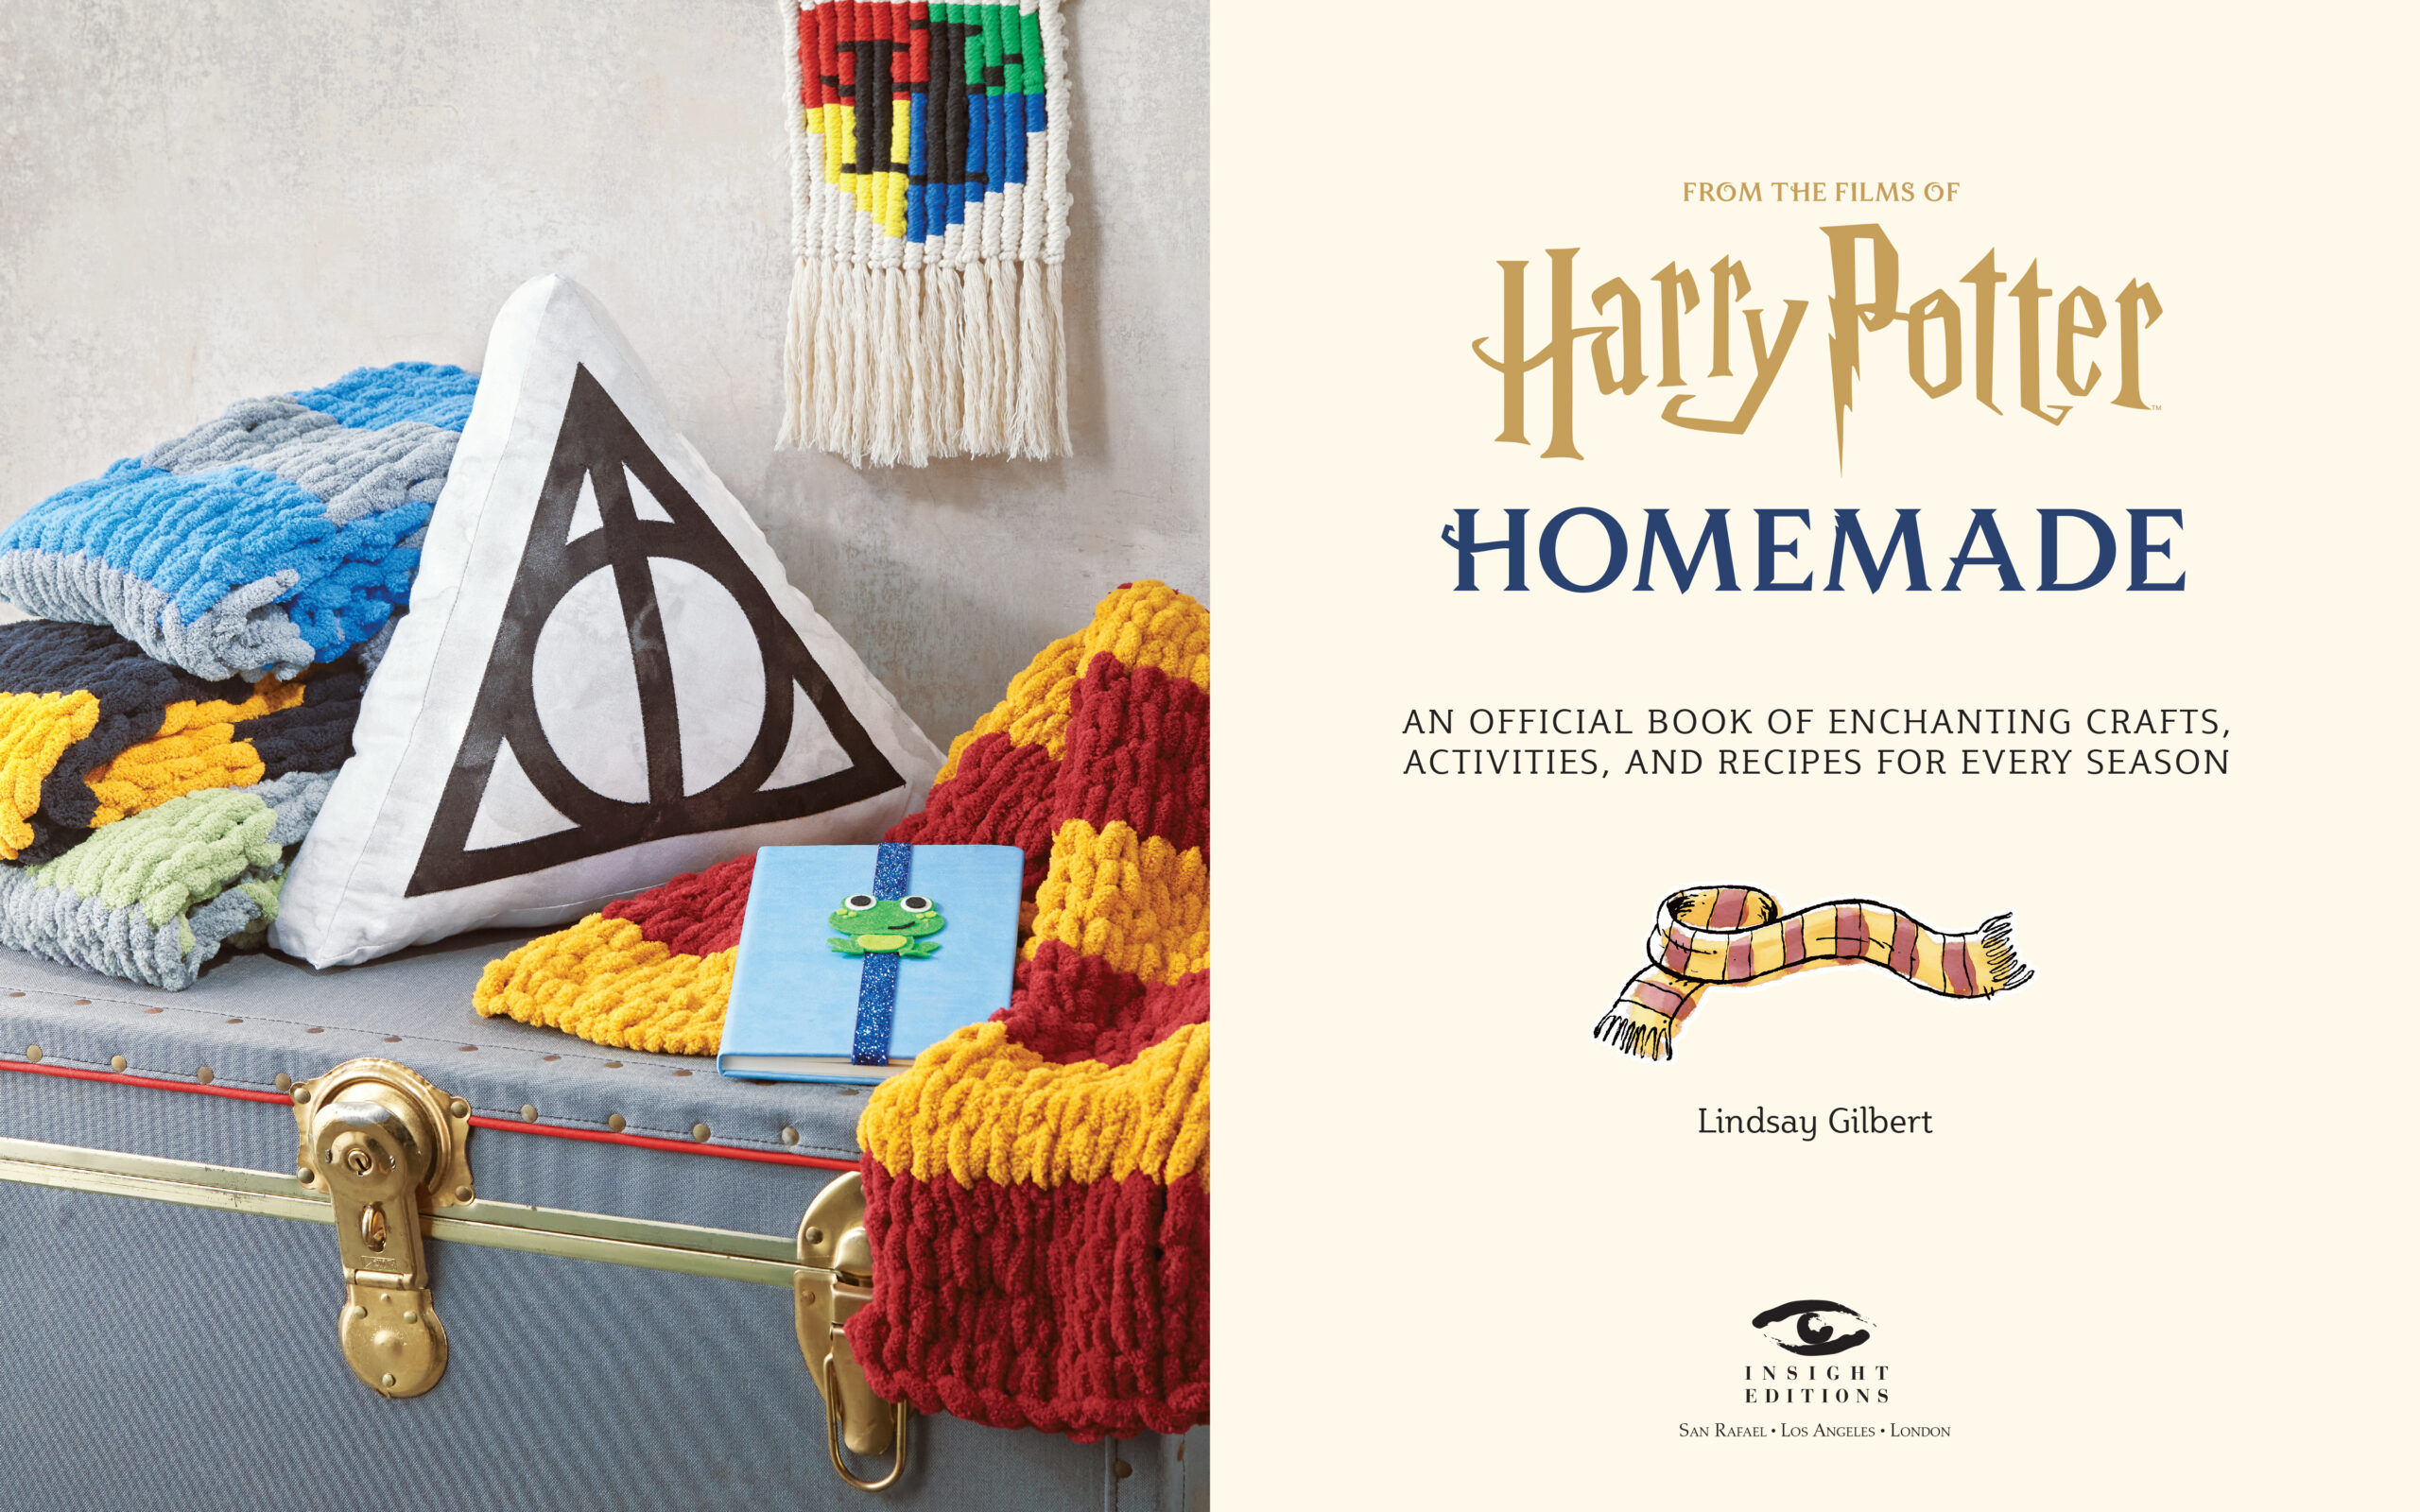 “Harry Potter: Homemade” will be released on October 11.